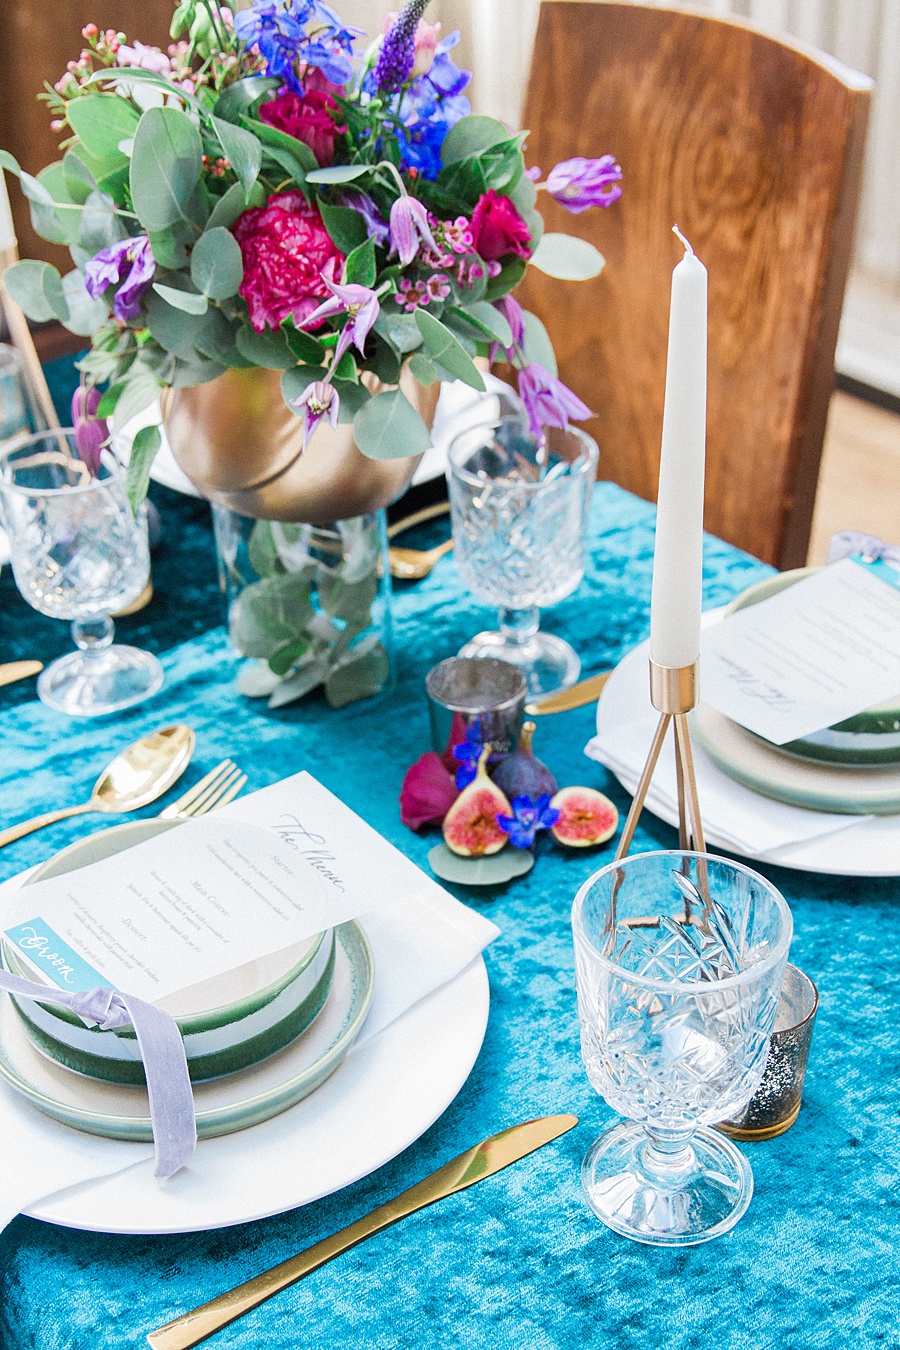 inspiration for a Greek wedding, photo credit Maxeen Kim Photography (30)